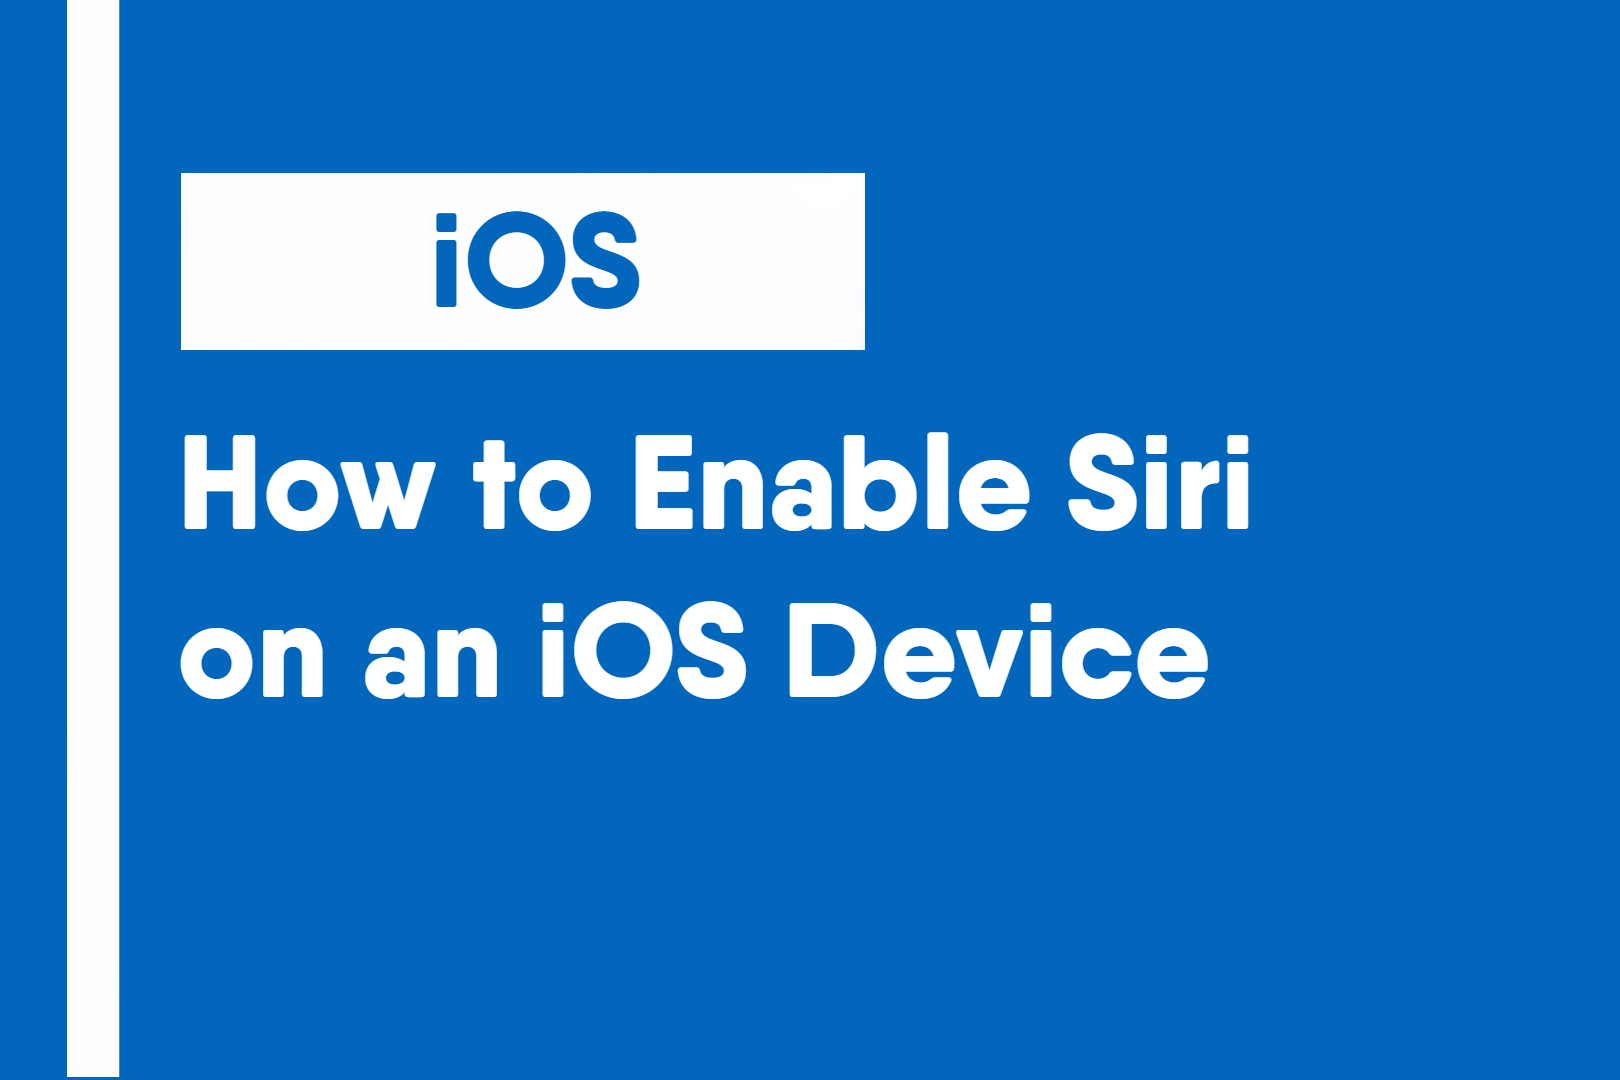 How to Enable Siri on an iOS Device